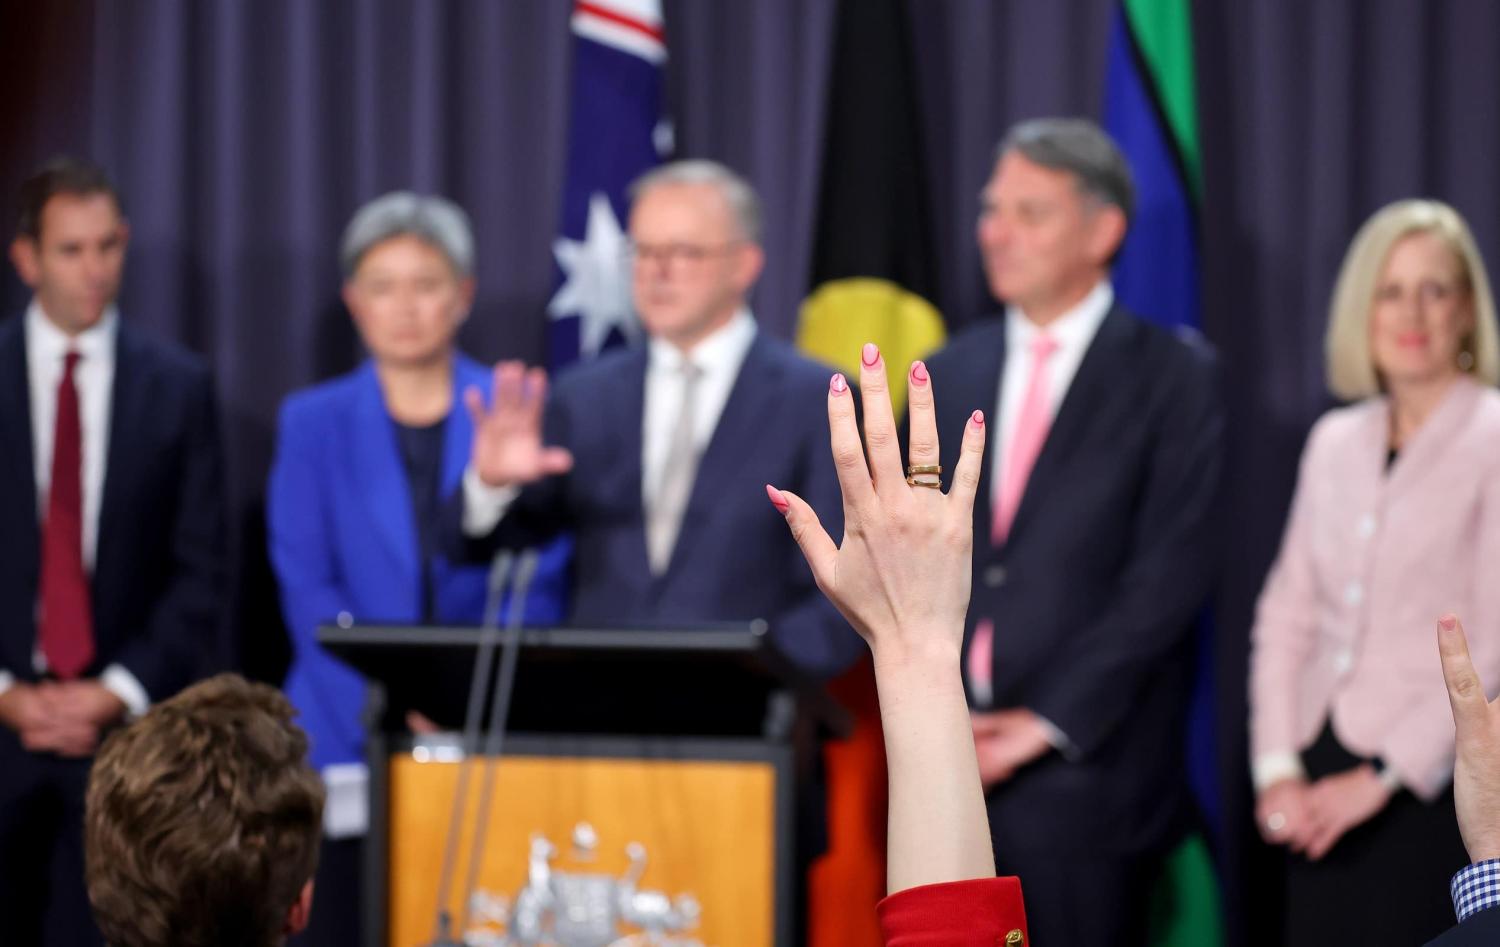 Prime Minister Anthony Albanese (C) speaks next to (L-R) Jim Chalmers, Penny Wong, Richard Marles and Katy Gallagher during a press conference at Parliament House, 23 May 2022 (David Gray/Getty Images)